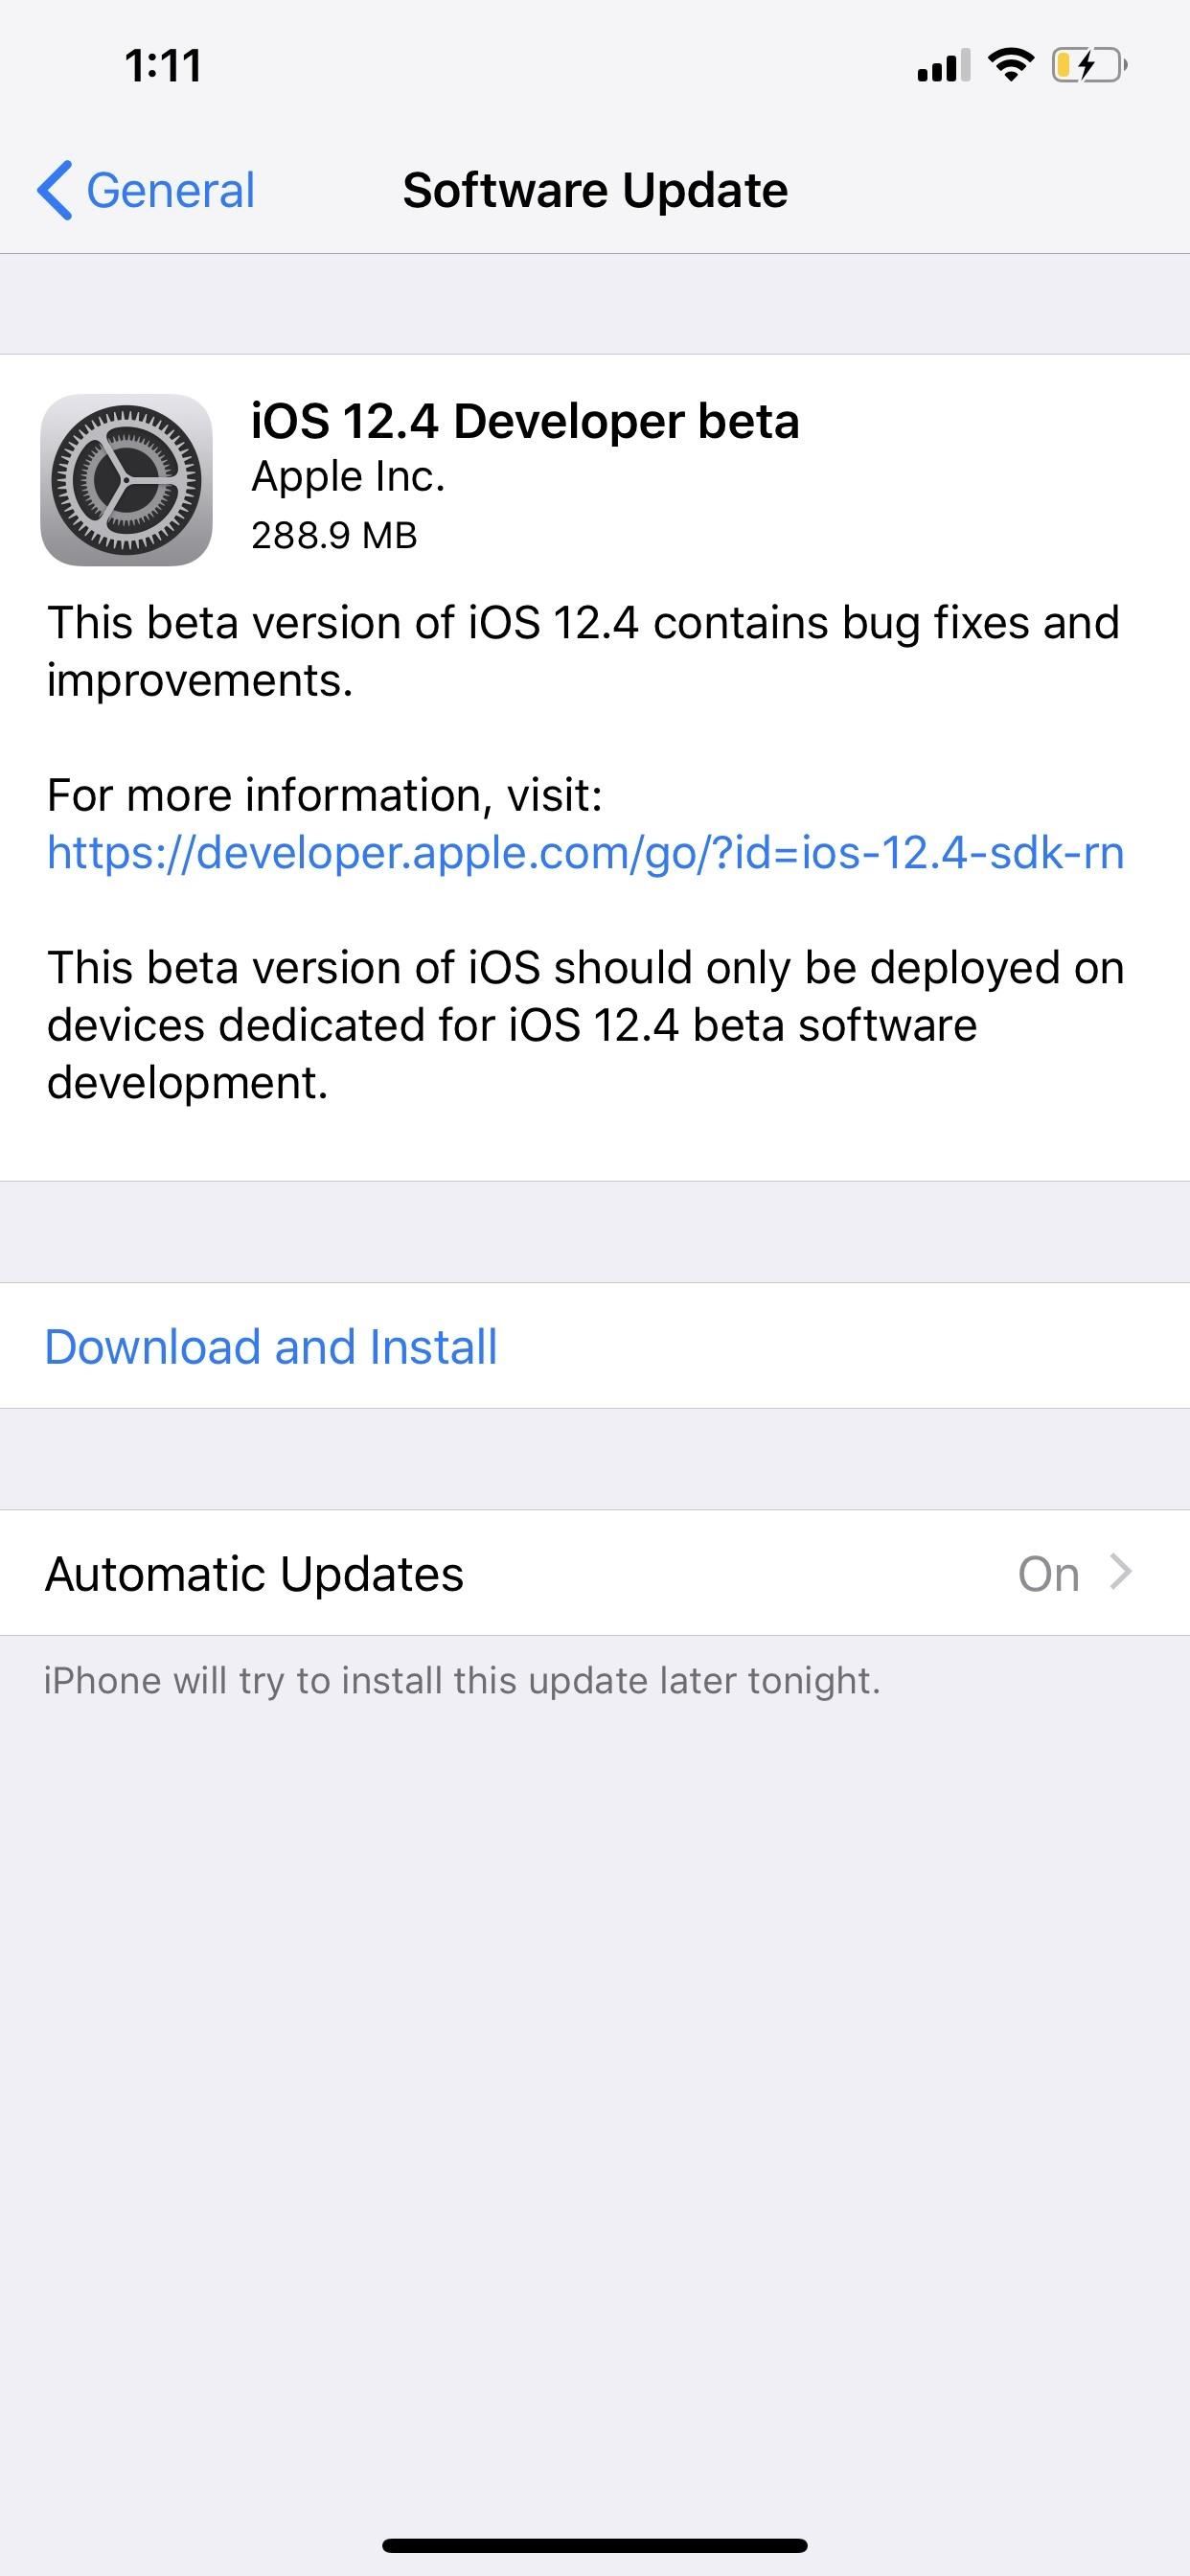 Apple Releases First iOS 12.4 Beta to Developers, Includes Support for Apple Card